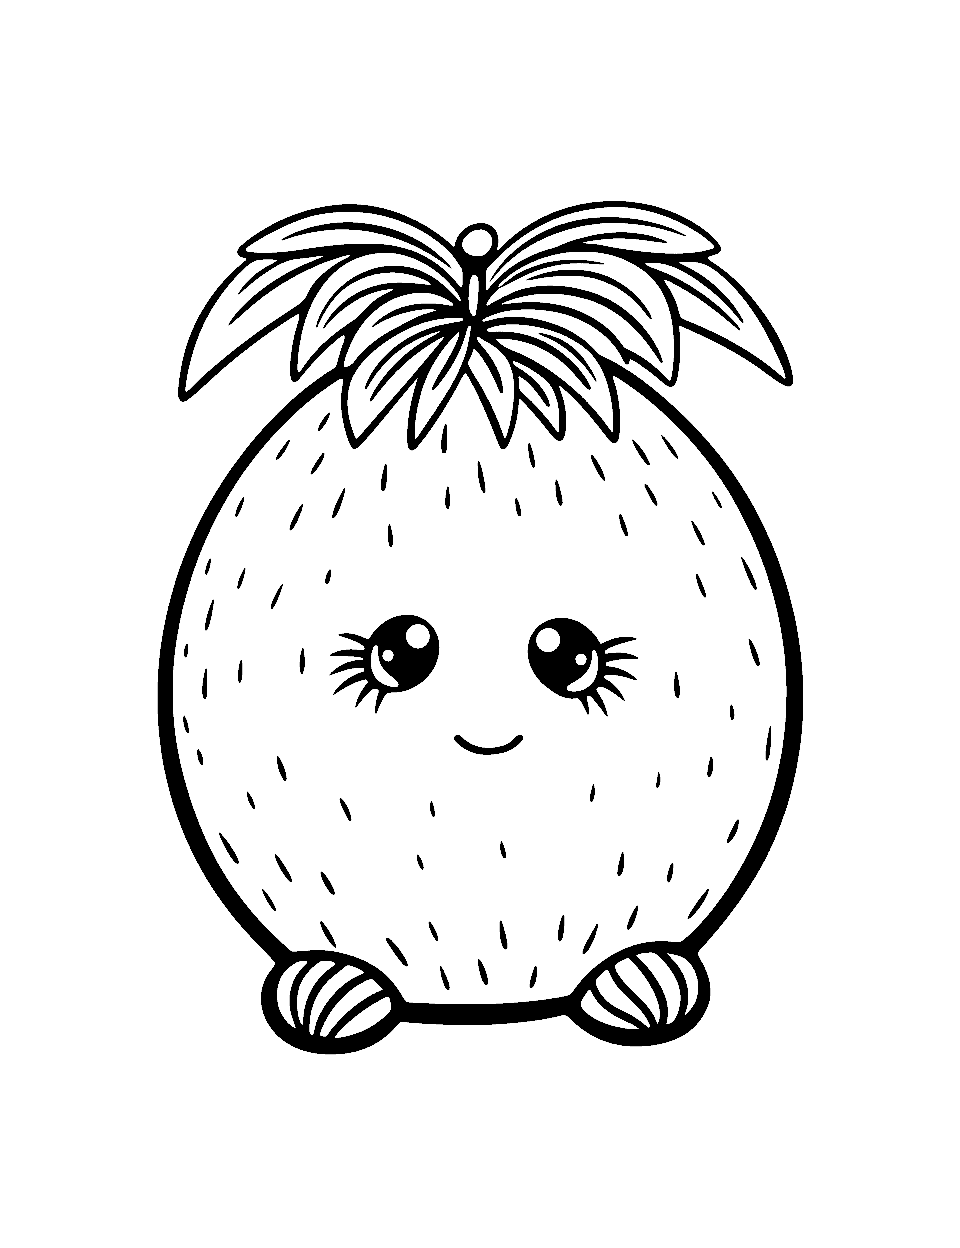 Cute Kiwi Fruit Coloring Page - A kiwi fruit with a cute face and tiny feet.